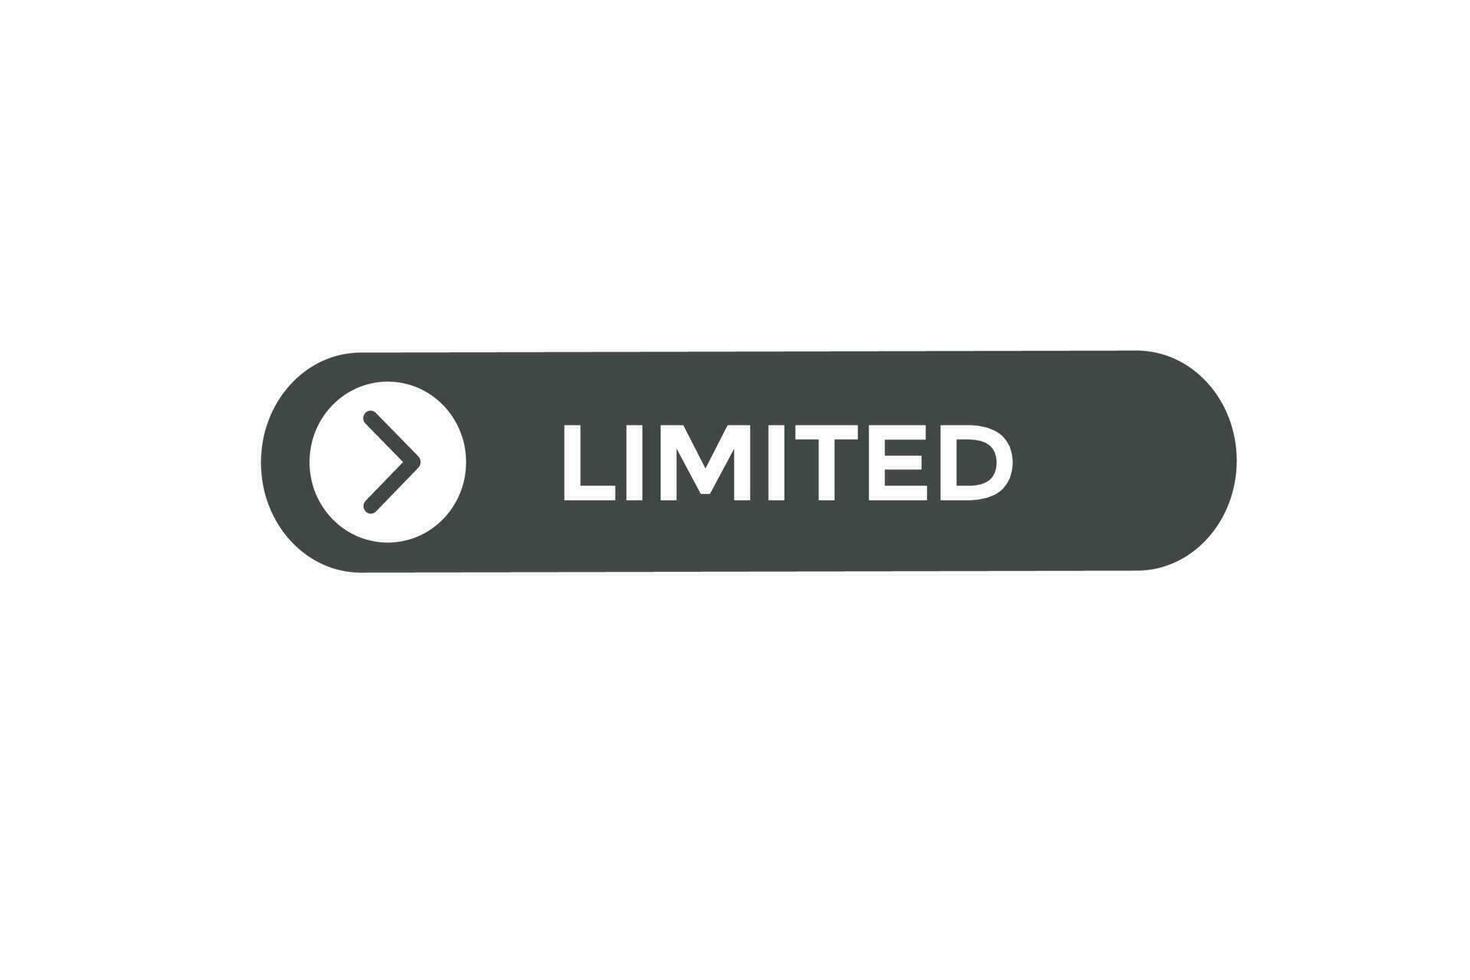 limited vectors.sign label bubble speech limited vector